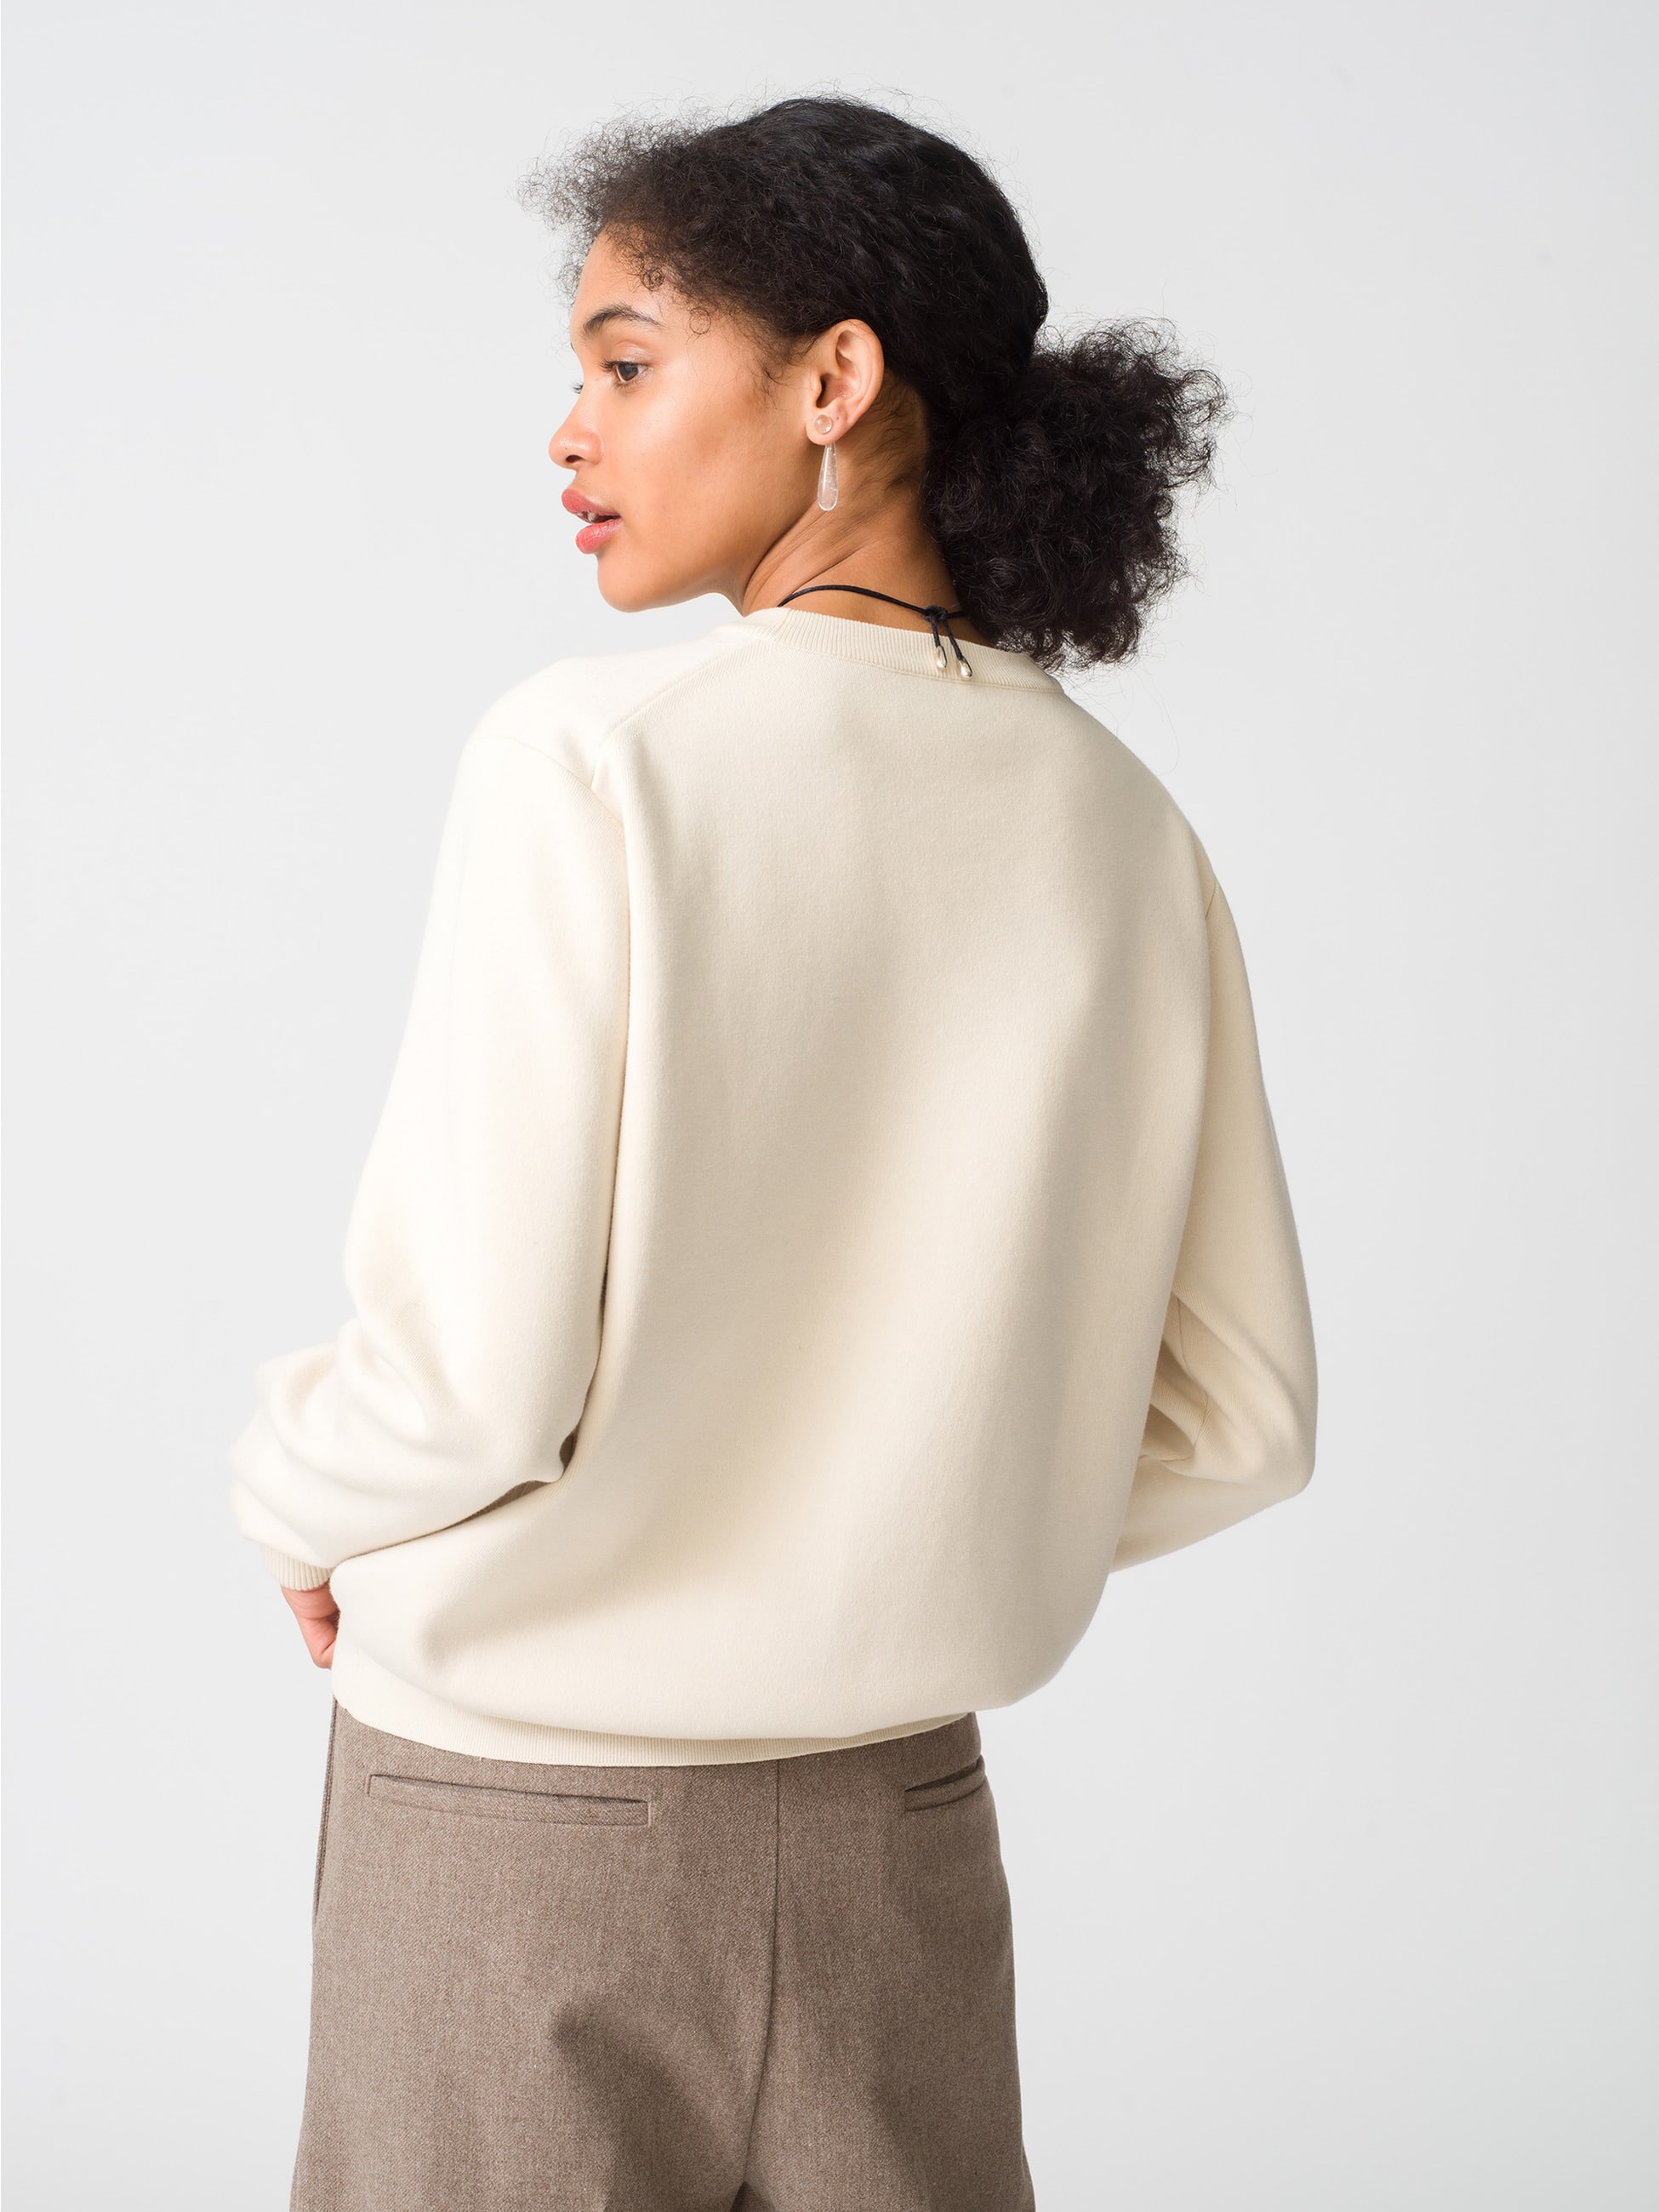 Brewed Protein Organic Cotton Knit Pullover 詳細画像 ivory 2